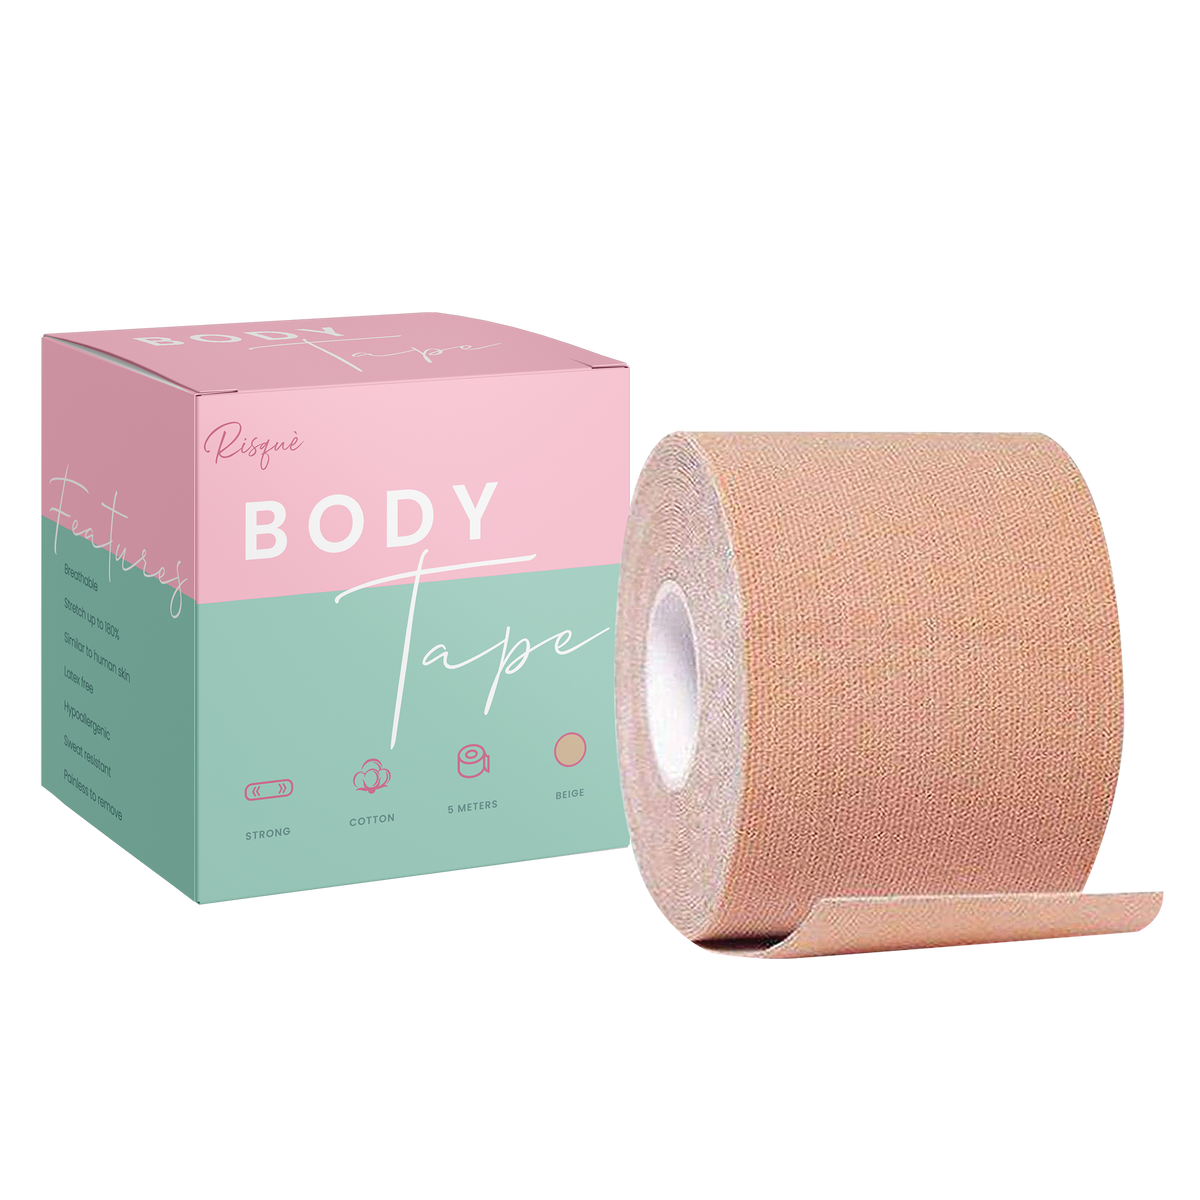 Boob Tape, Boobytape for Breast Lift, Achieve Lift & Contour of Breasts, Sticky Athletic Tape for Push up & Shape in All Clothing Fabric Dress Types